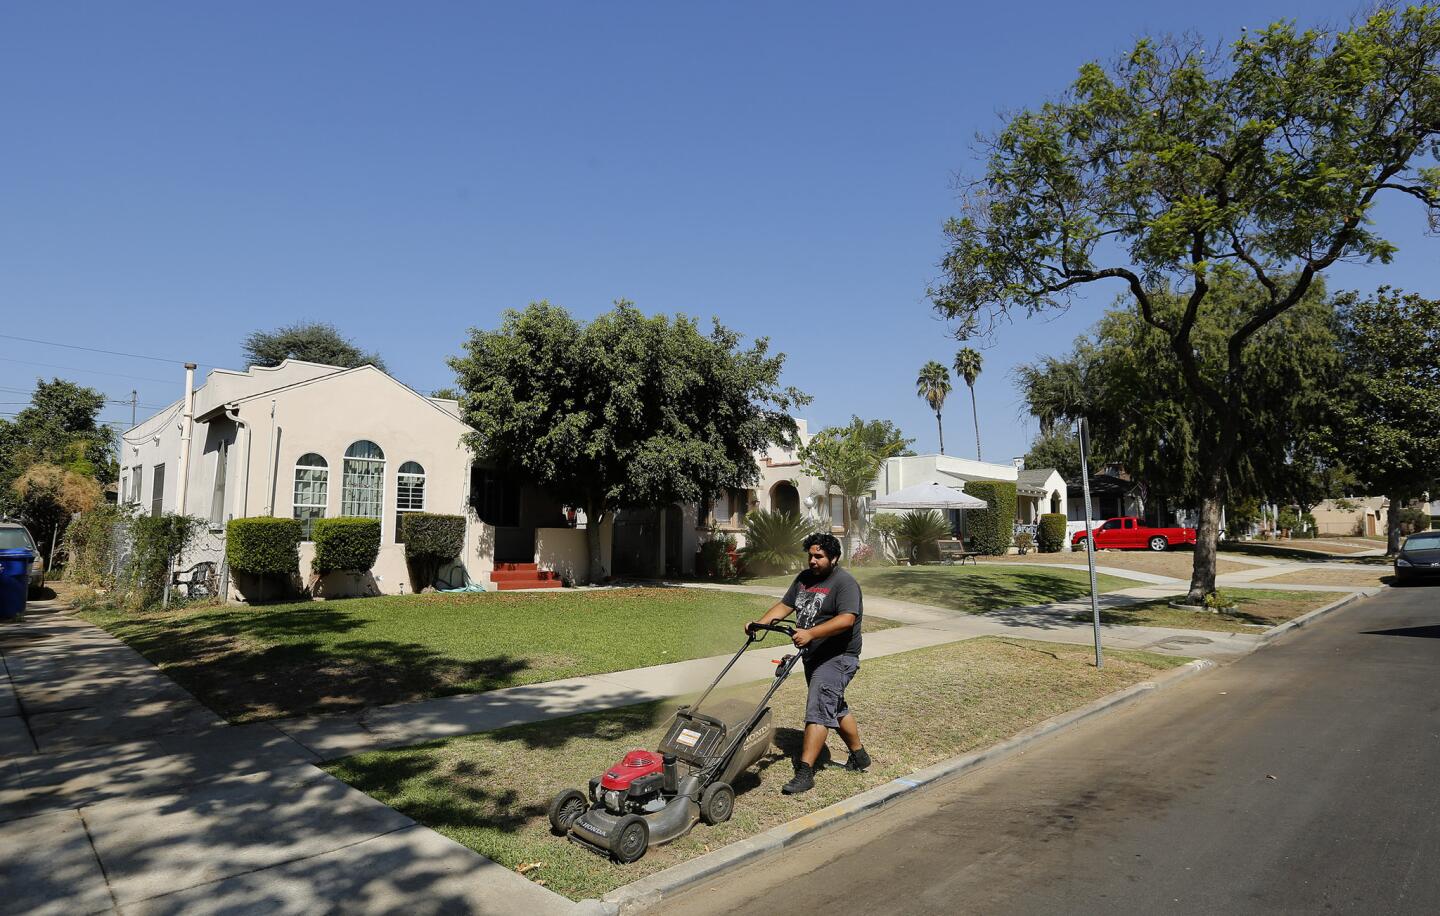 Gardener Leo Munguia mows the front lawn of a home on Sheffield Avenue in El Sereno that is owned by Caltrans. It is one of many properties purchased by the agency in the 1950s and '60s in anticipation of the 710 Freeway extension, which was never finished.